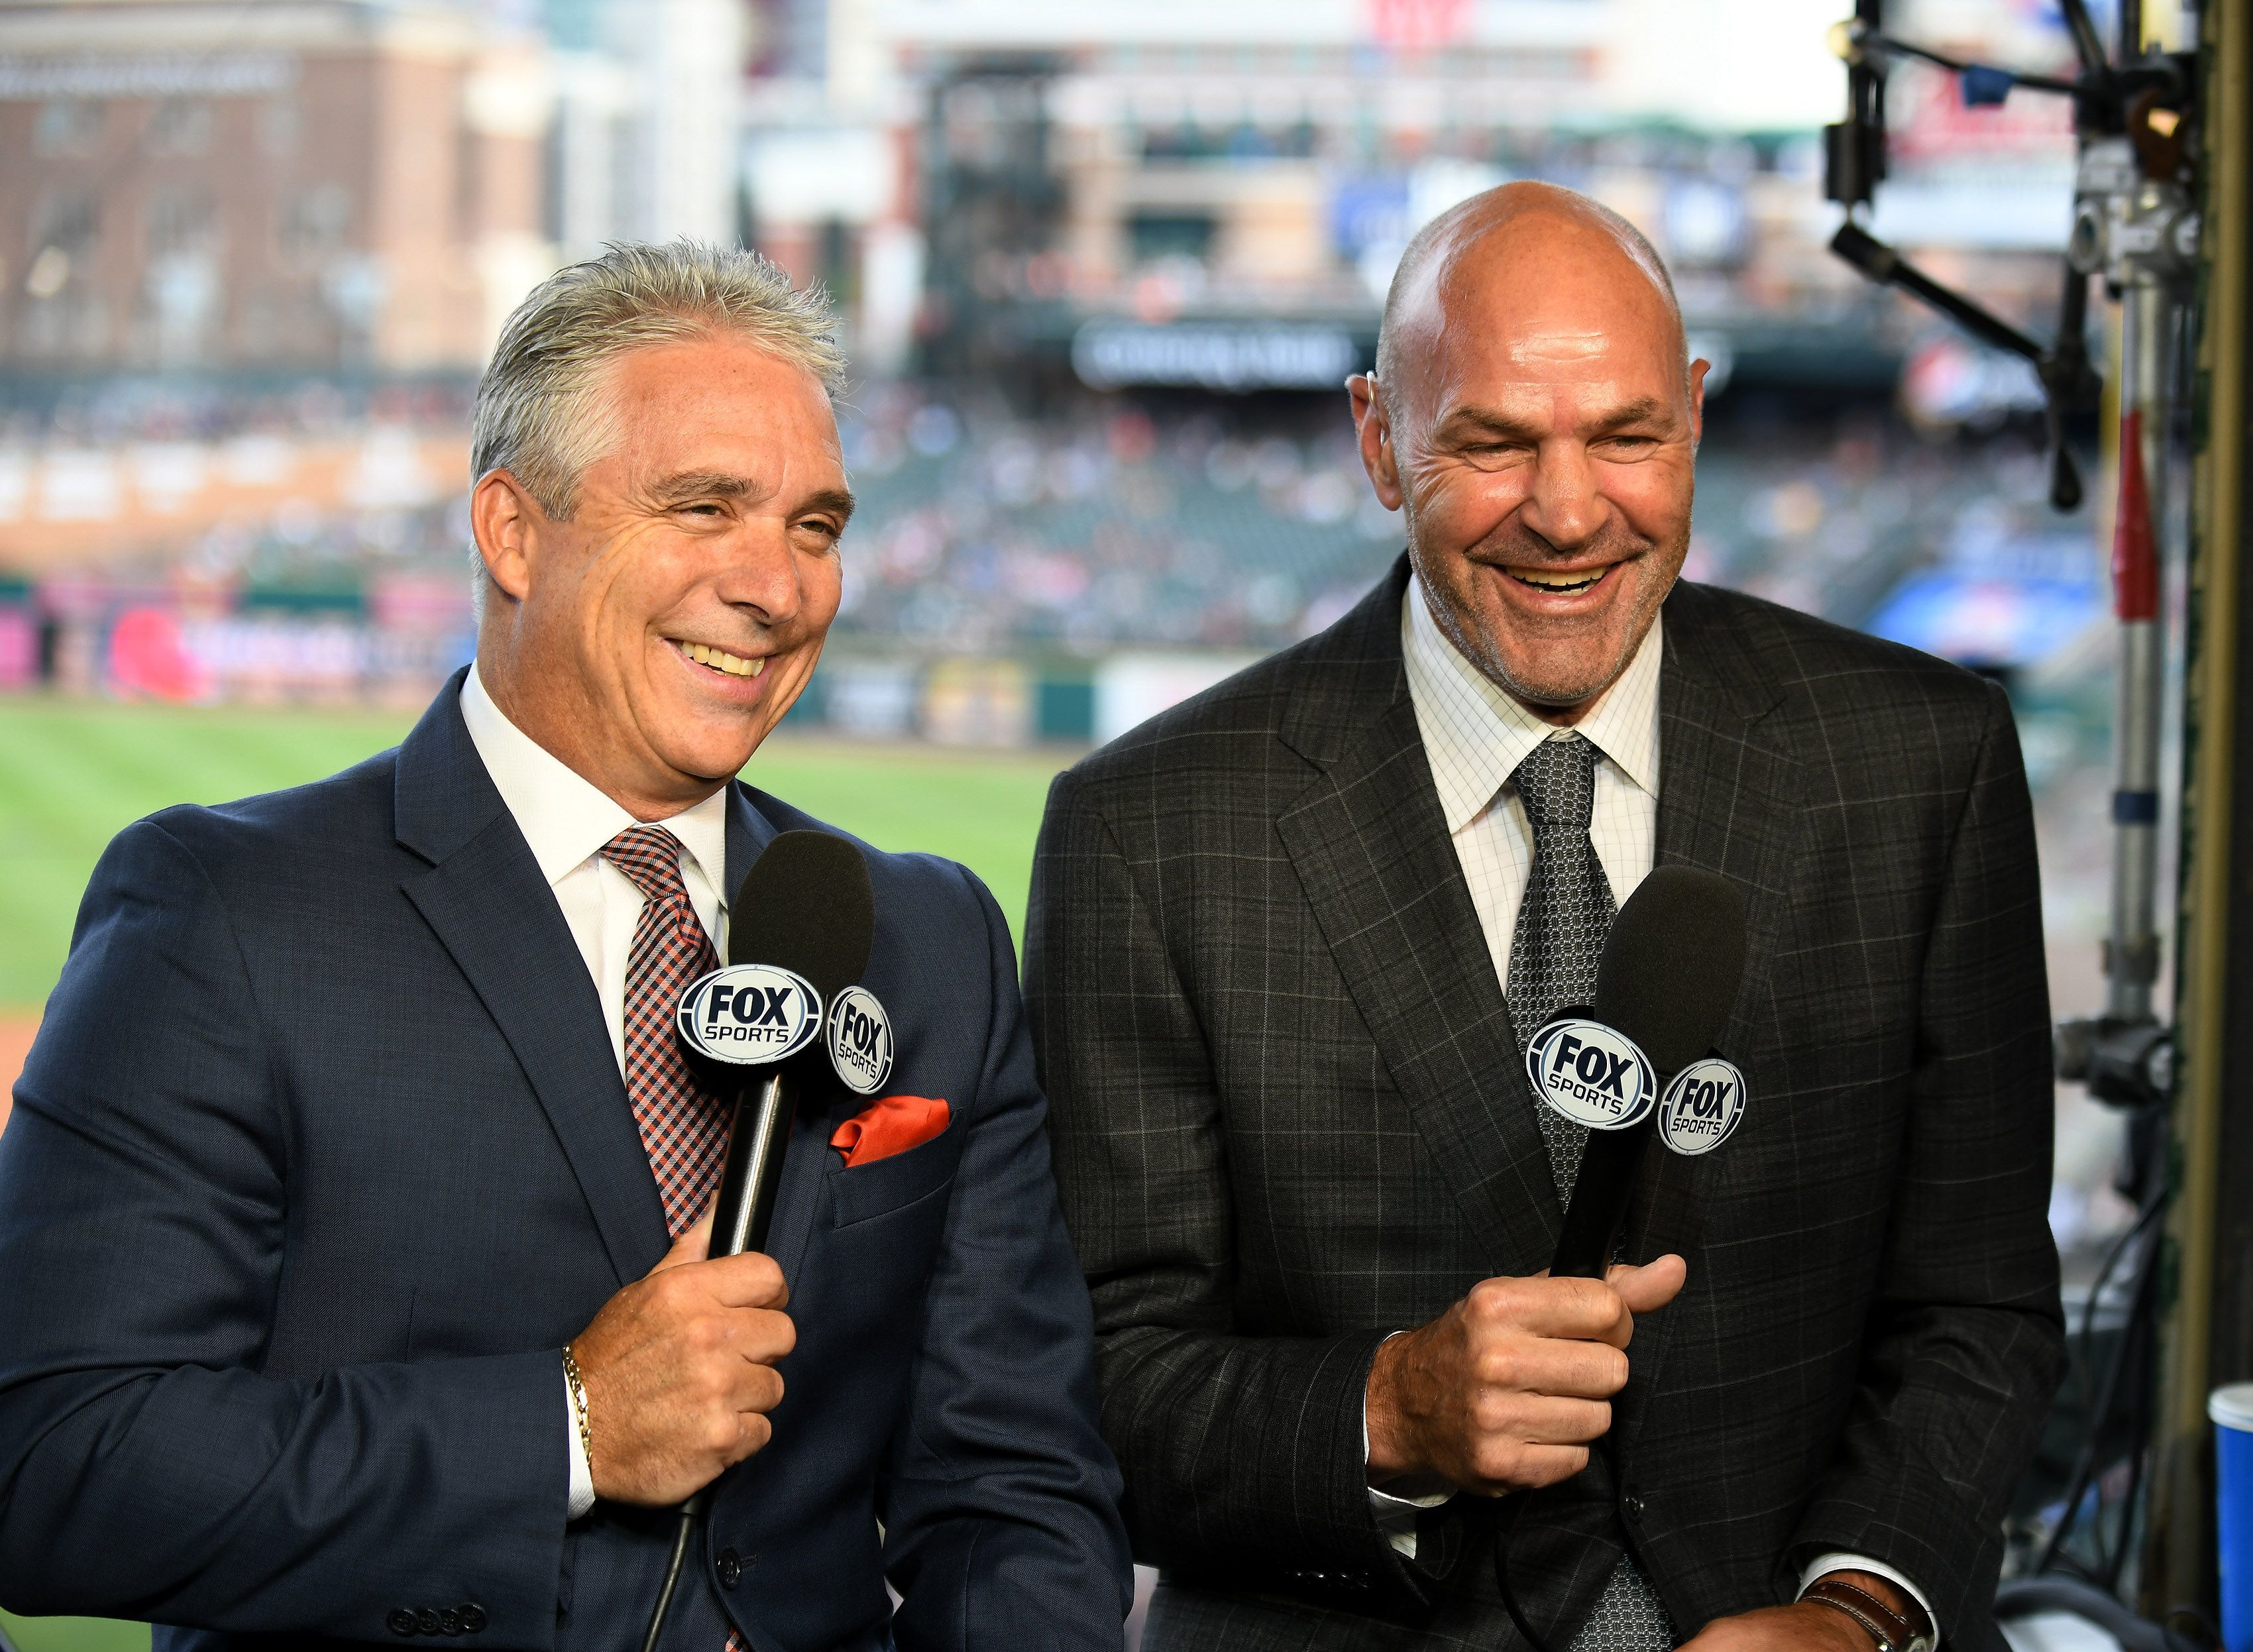 Matt Shepard (left), shown here with former Tigers great Kirk Gibson, will be Fox Sports Detroit's new play-by-play broadcaster for Tigers games.